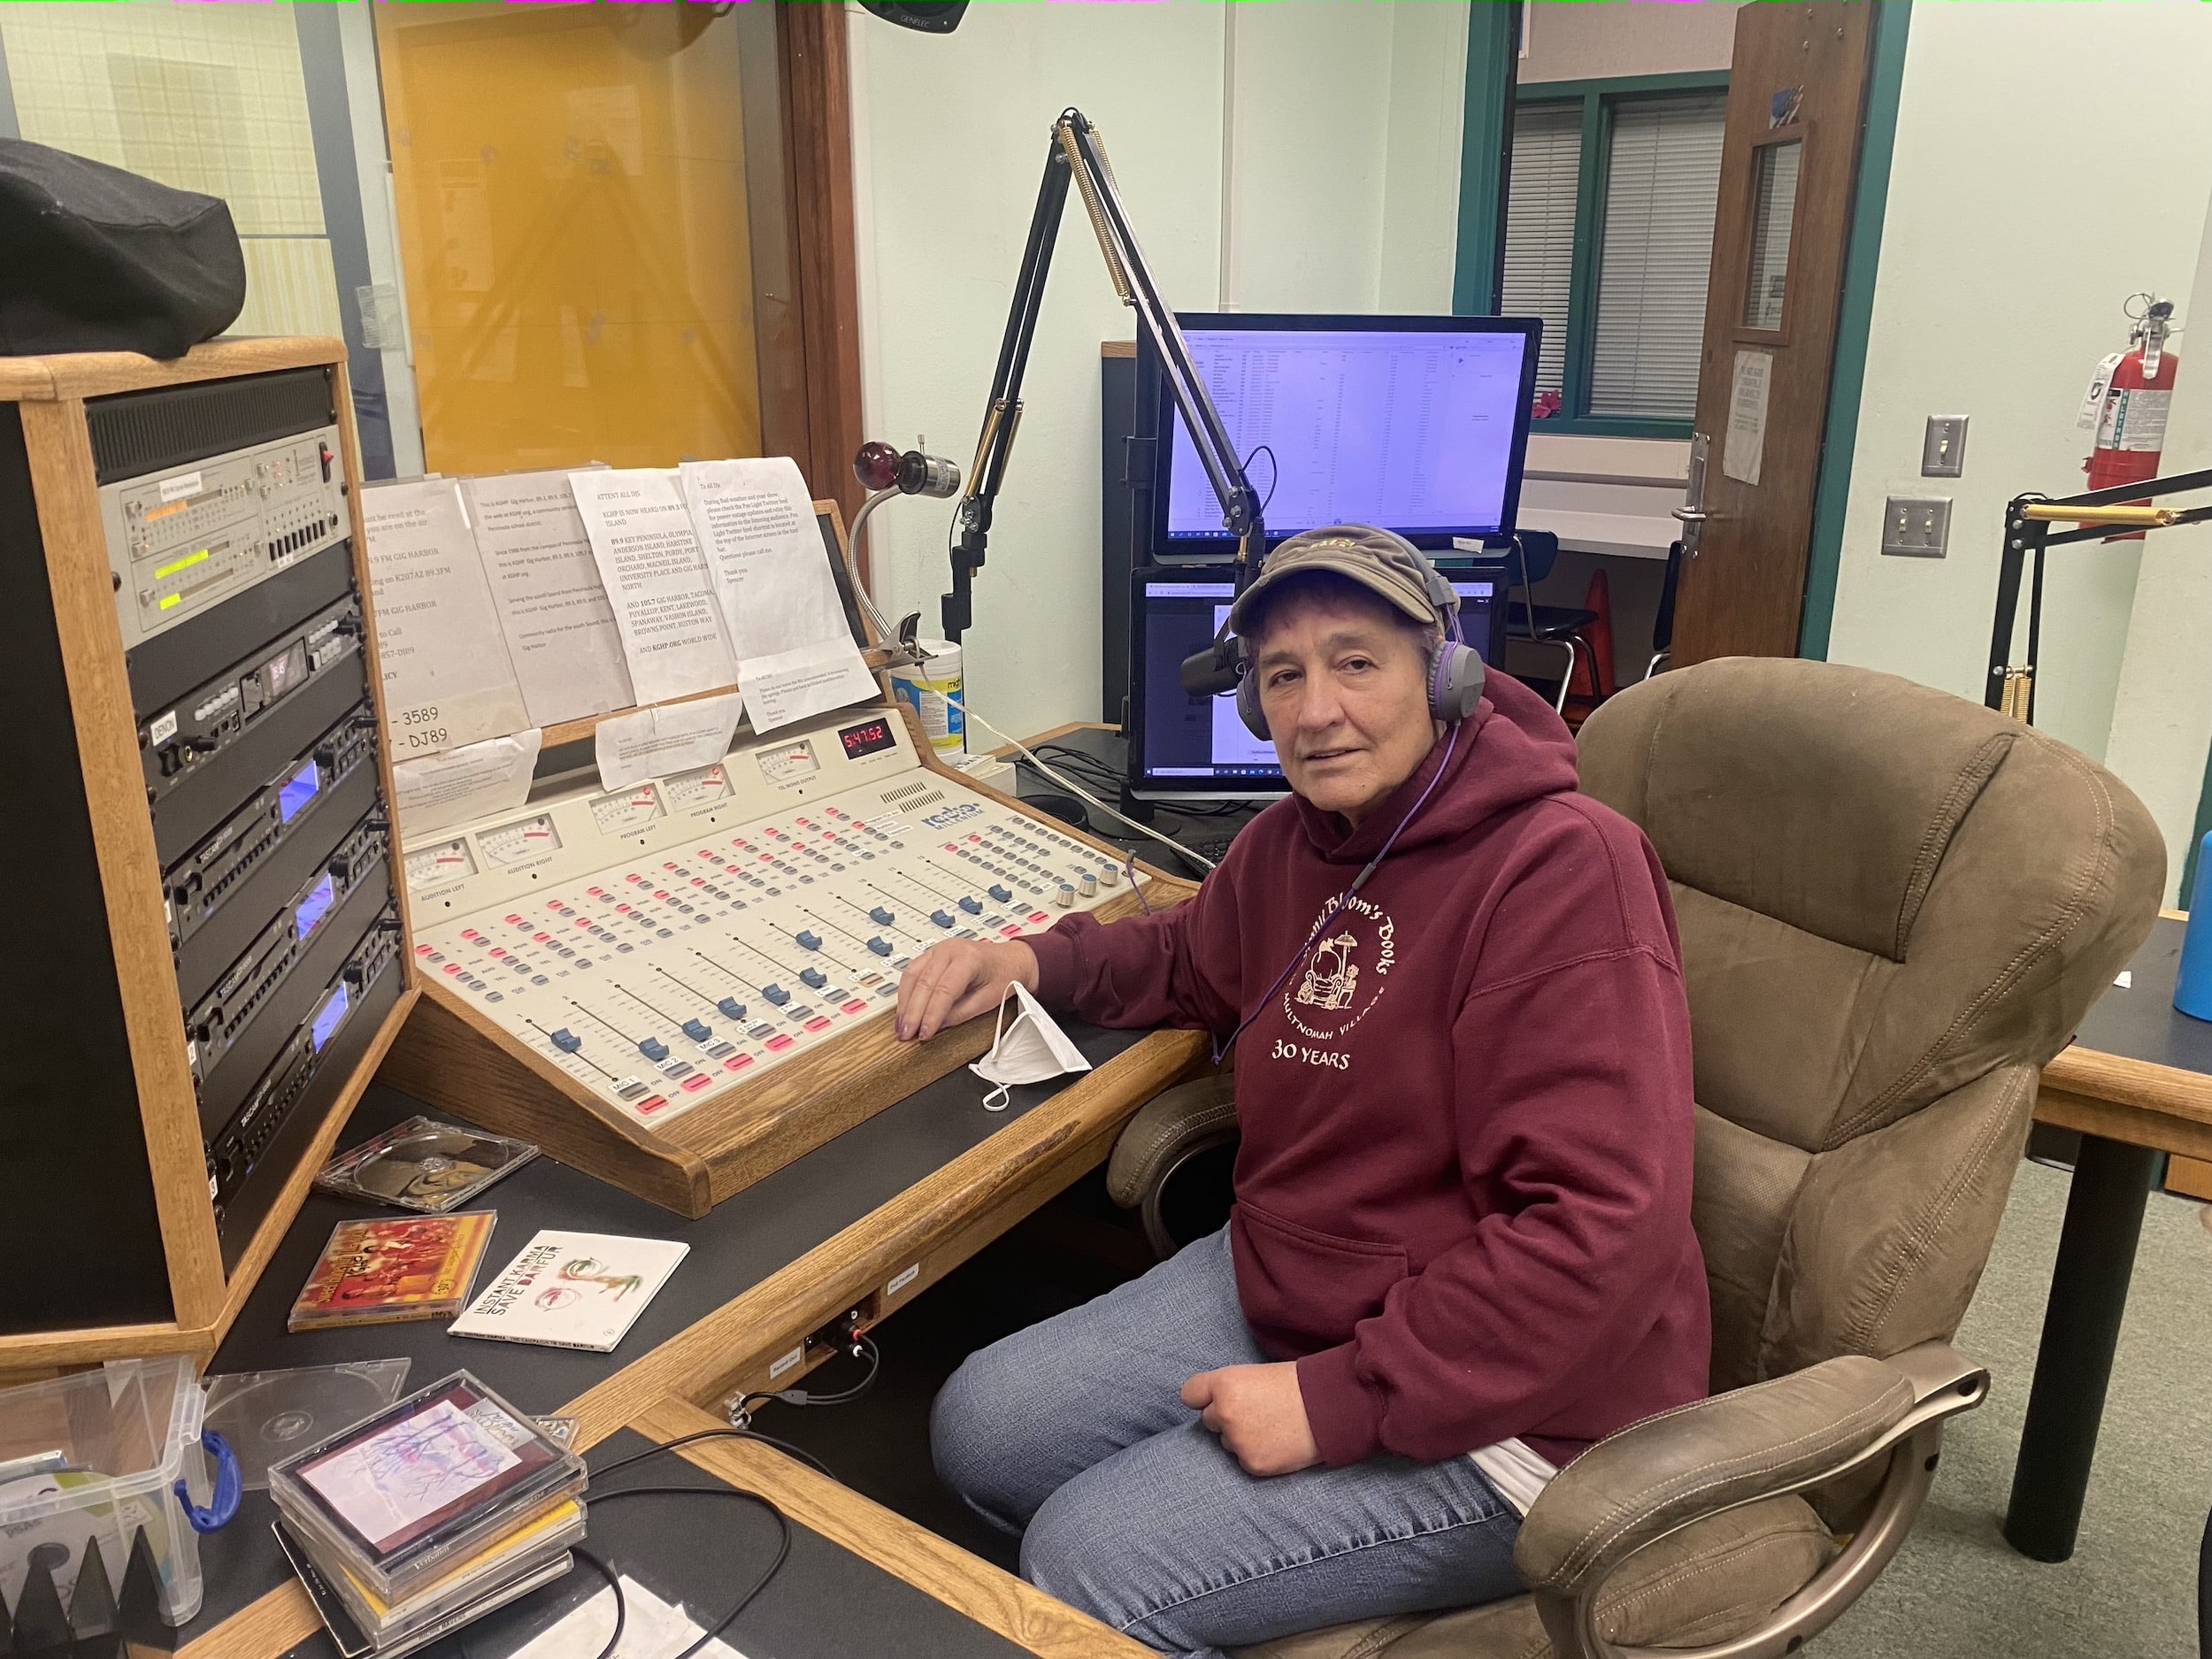 Betty Devereux, host of BD’s Books and Friends, takes a break from broadcasting her show at KGHP-FM on Thursday